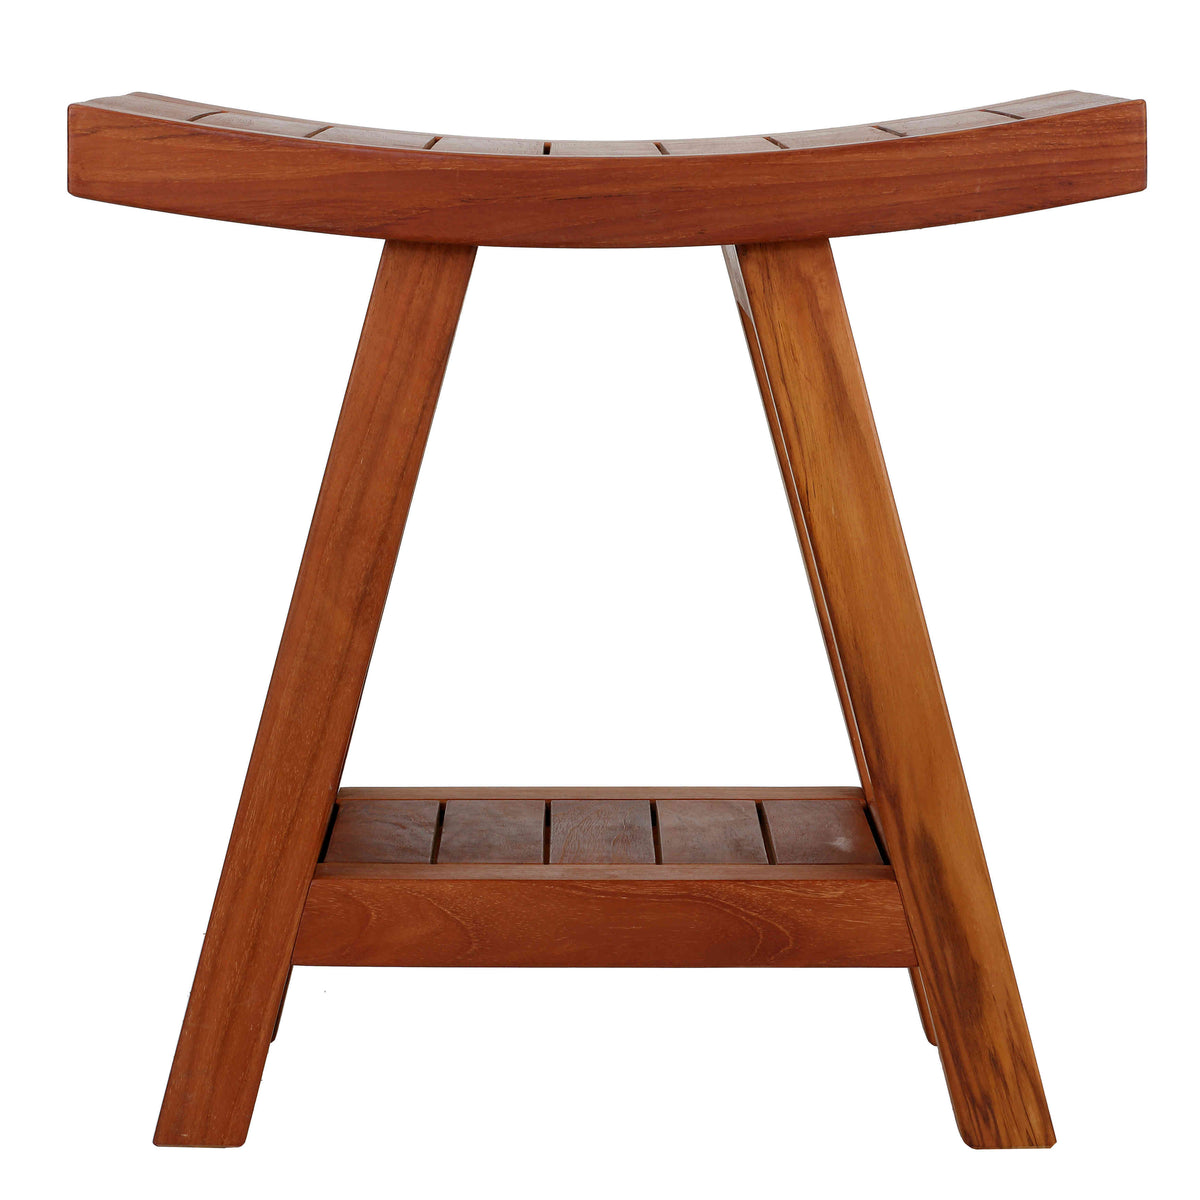 Bare Decor Niles Bench Stool with Shelf in Solid Teak Wood